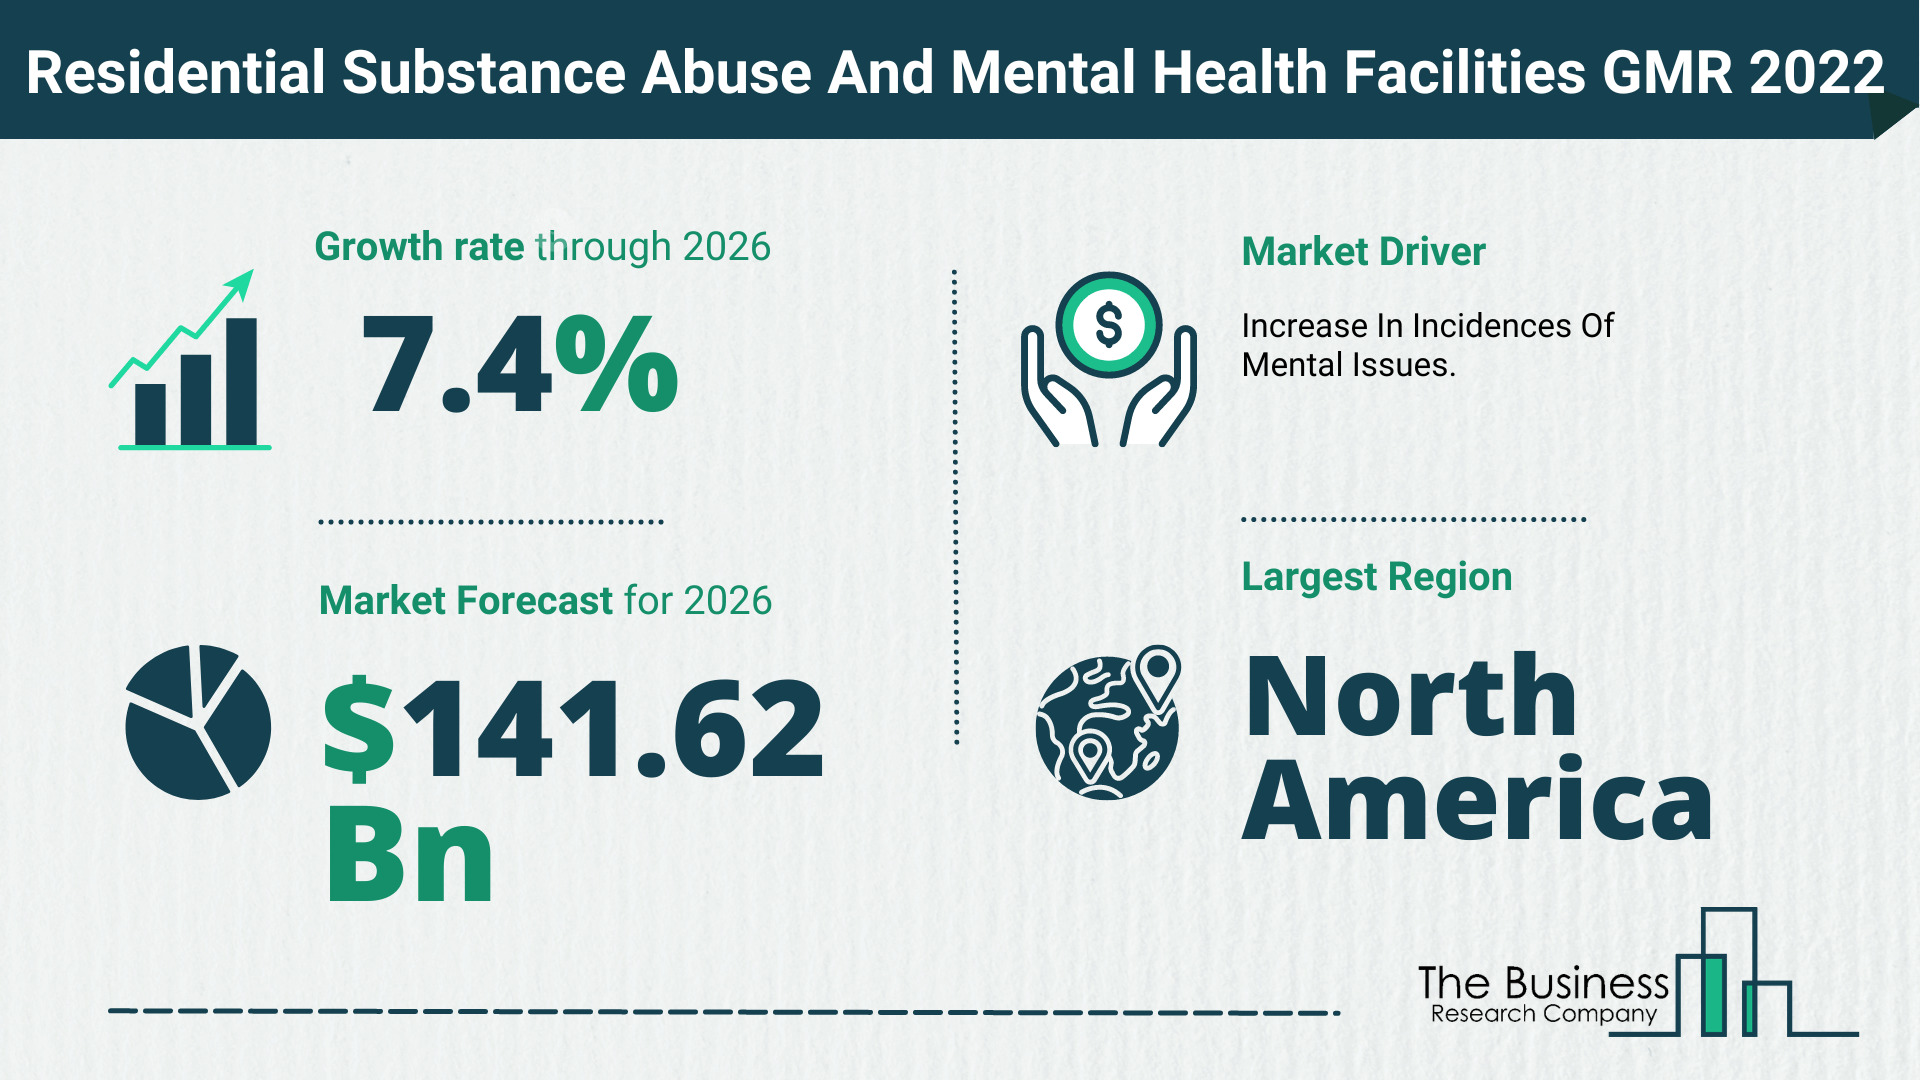 Global Residential Substance Abuse And Mental Health Facilities Market 2022 – Market Opportunities And Strategies